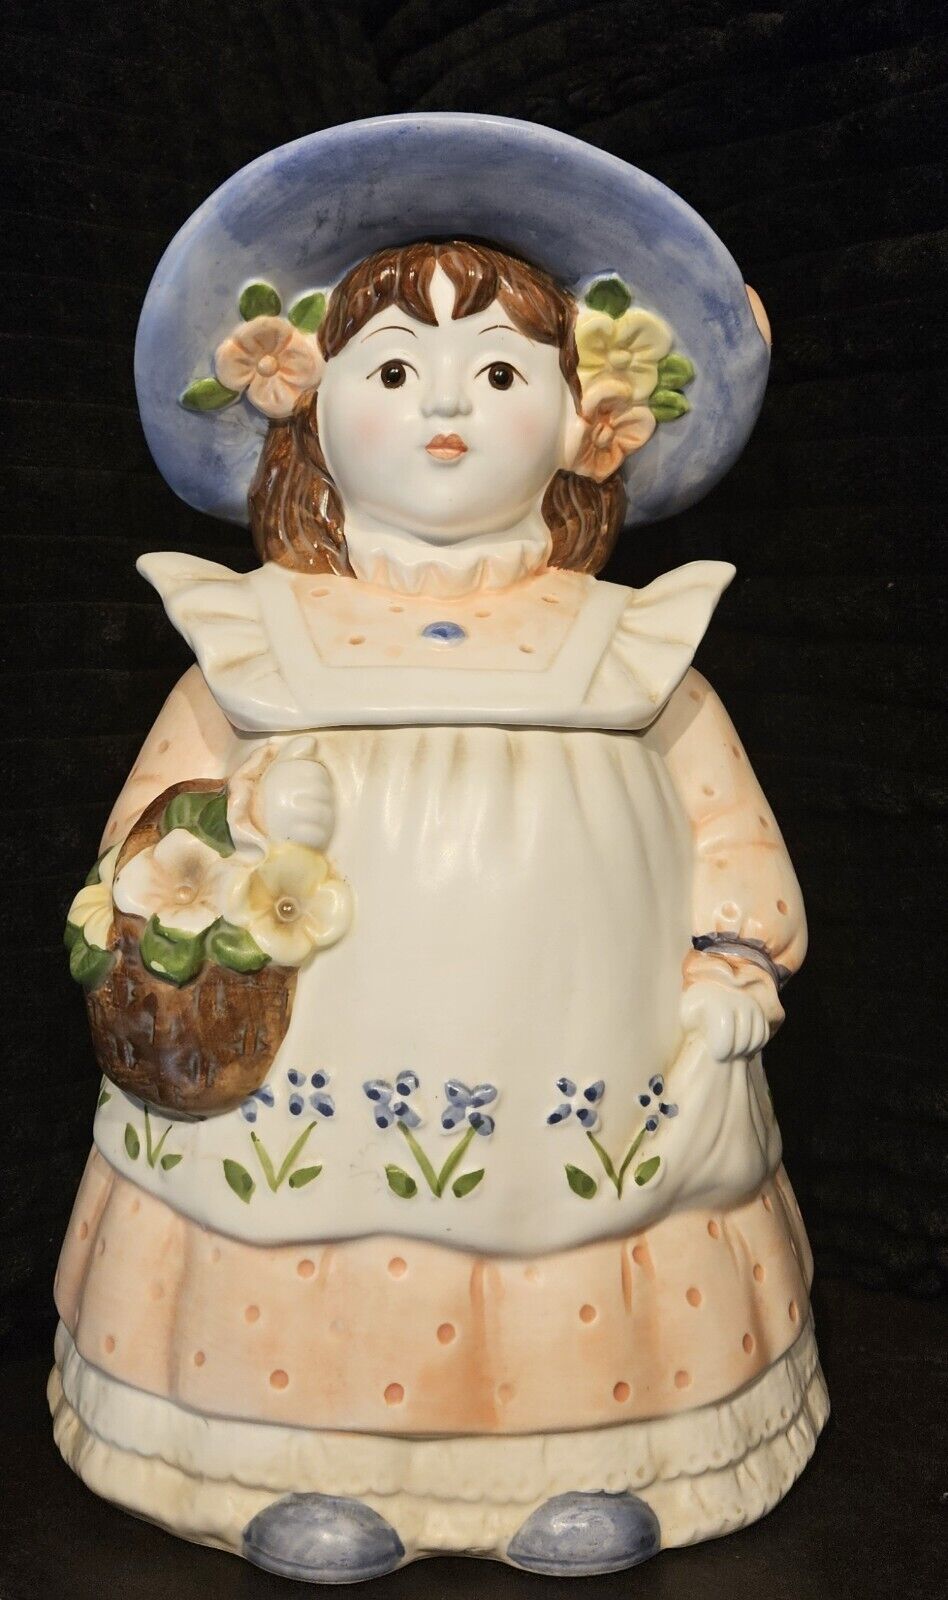 Takahashi Ceramic Cookie Jar - Girl In Bonnet With Basket Of Flowers 